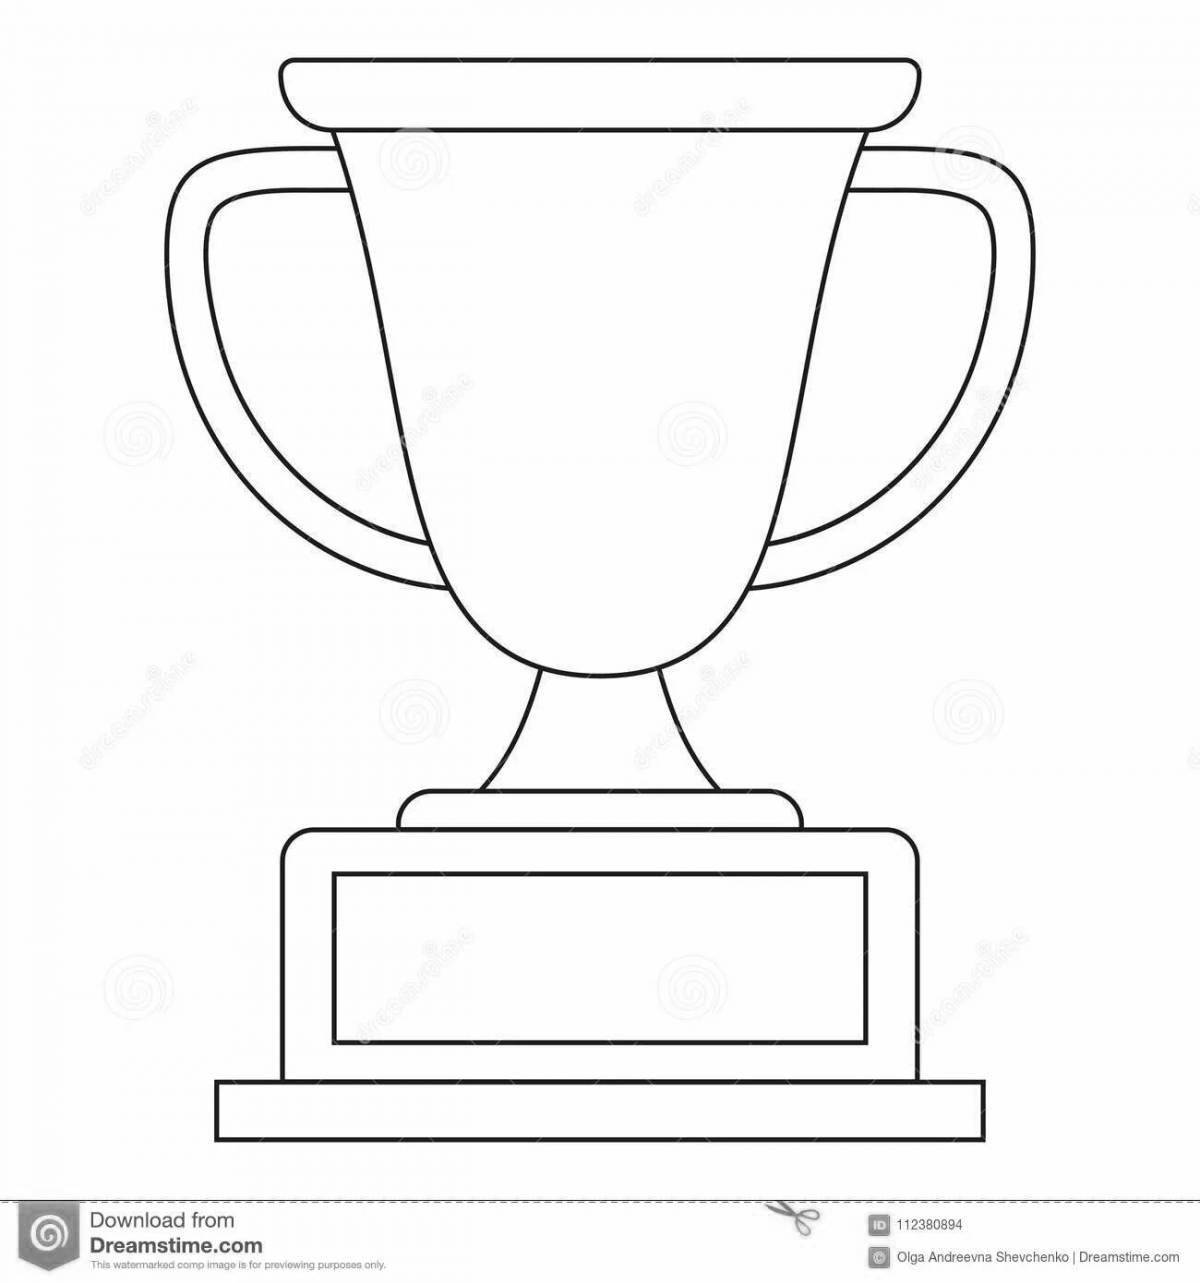 Coloring page funny football cup